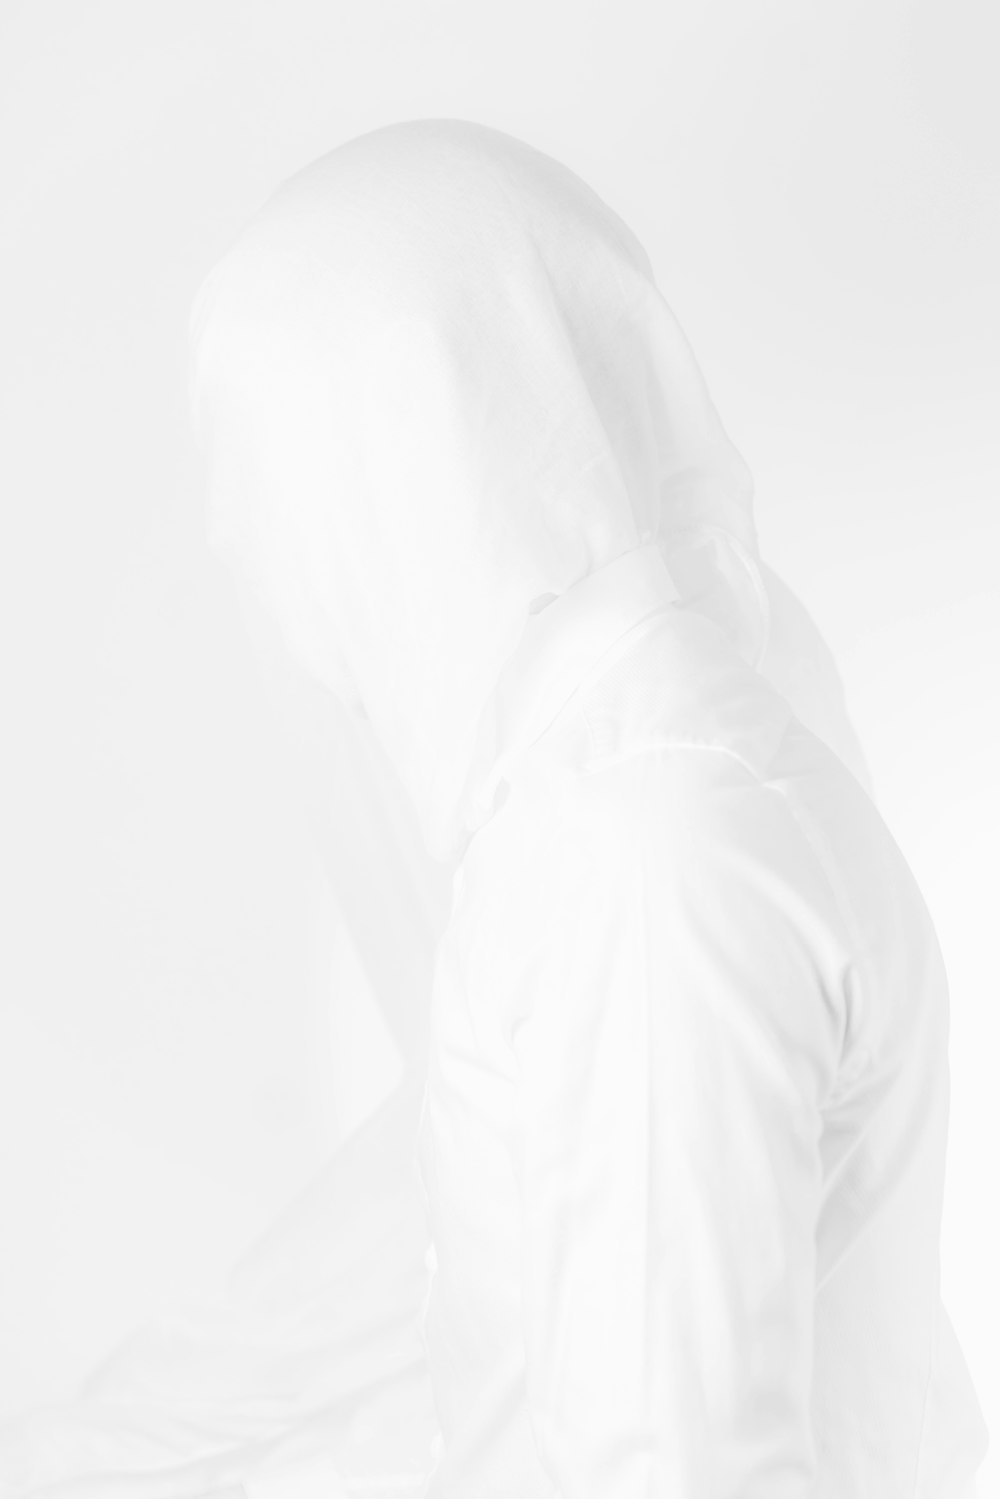 a person in a white jacket with a hood up